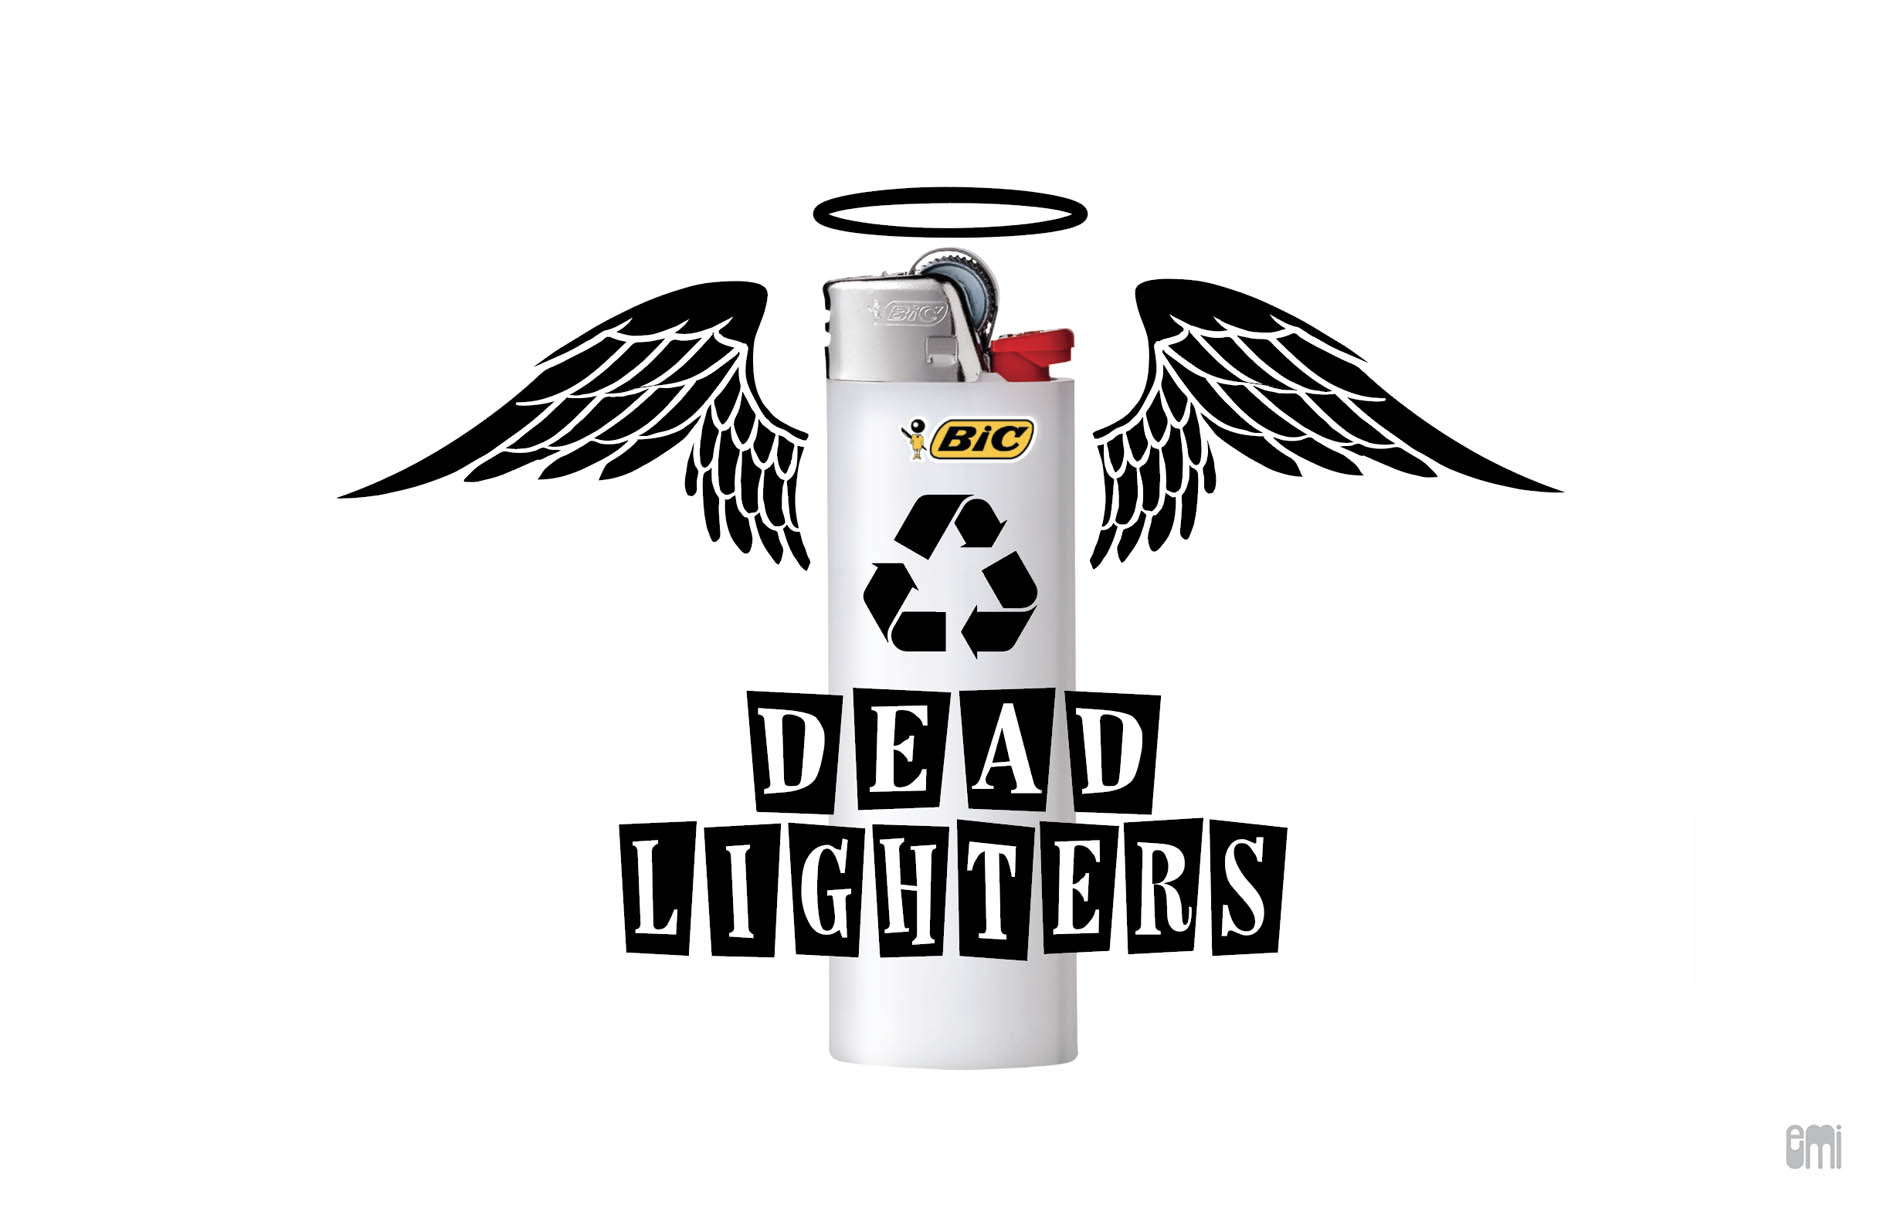 recycling used bic lights campaign logo, design by emi